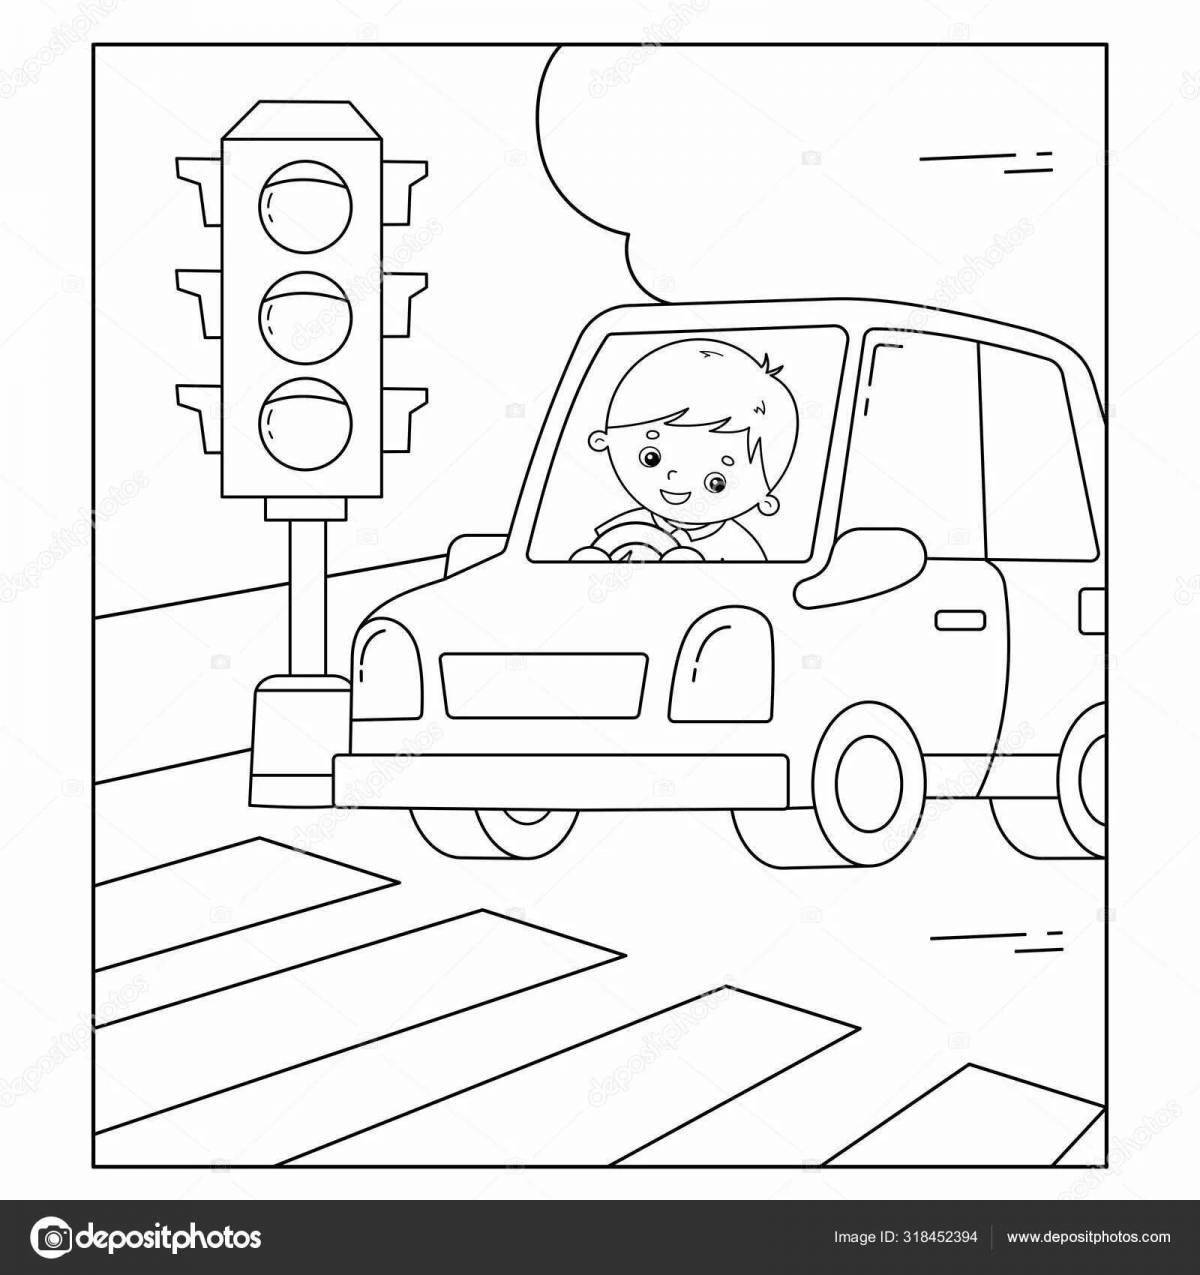 Coloring book shiny street cars